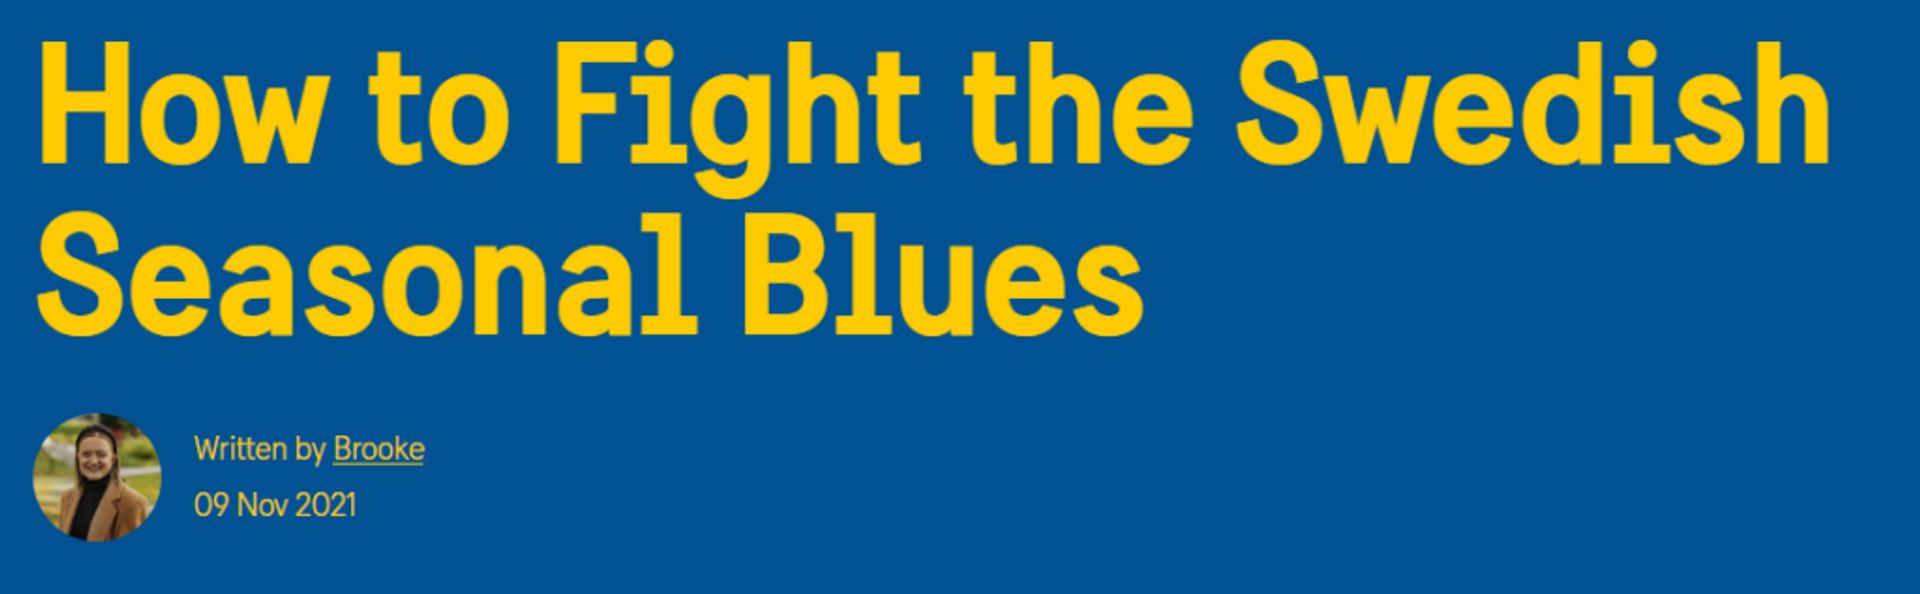 Title of the blog post: How to Fight the Swedish Seasonal Blues